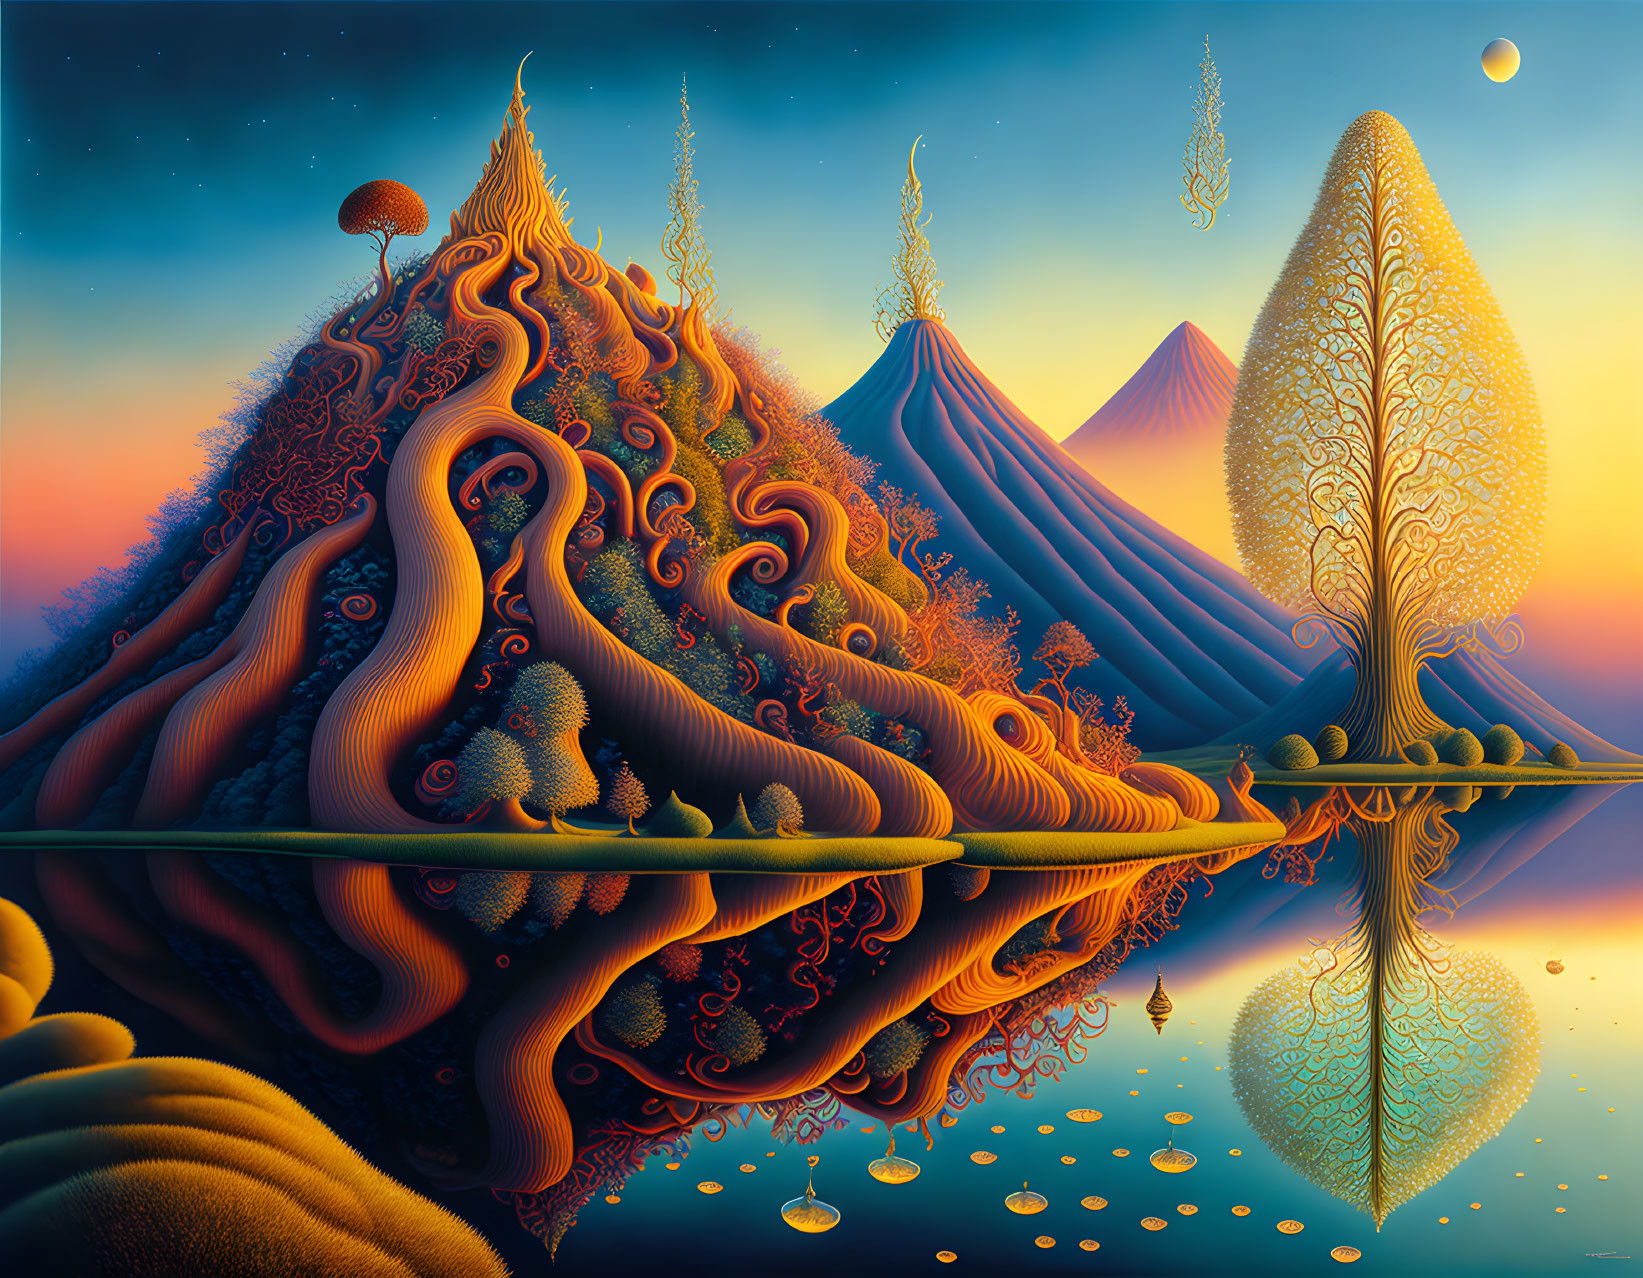 Vibrant surreal landscape with organic patterns, reflective water, and sunset sky